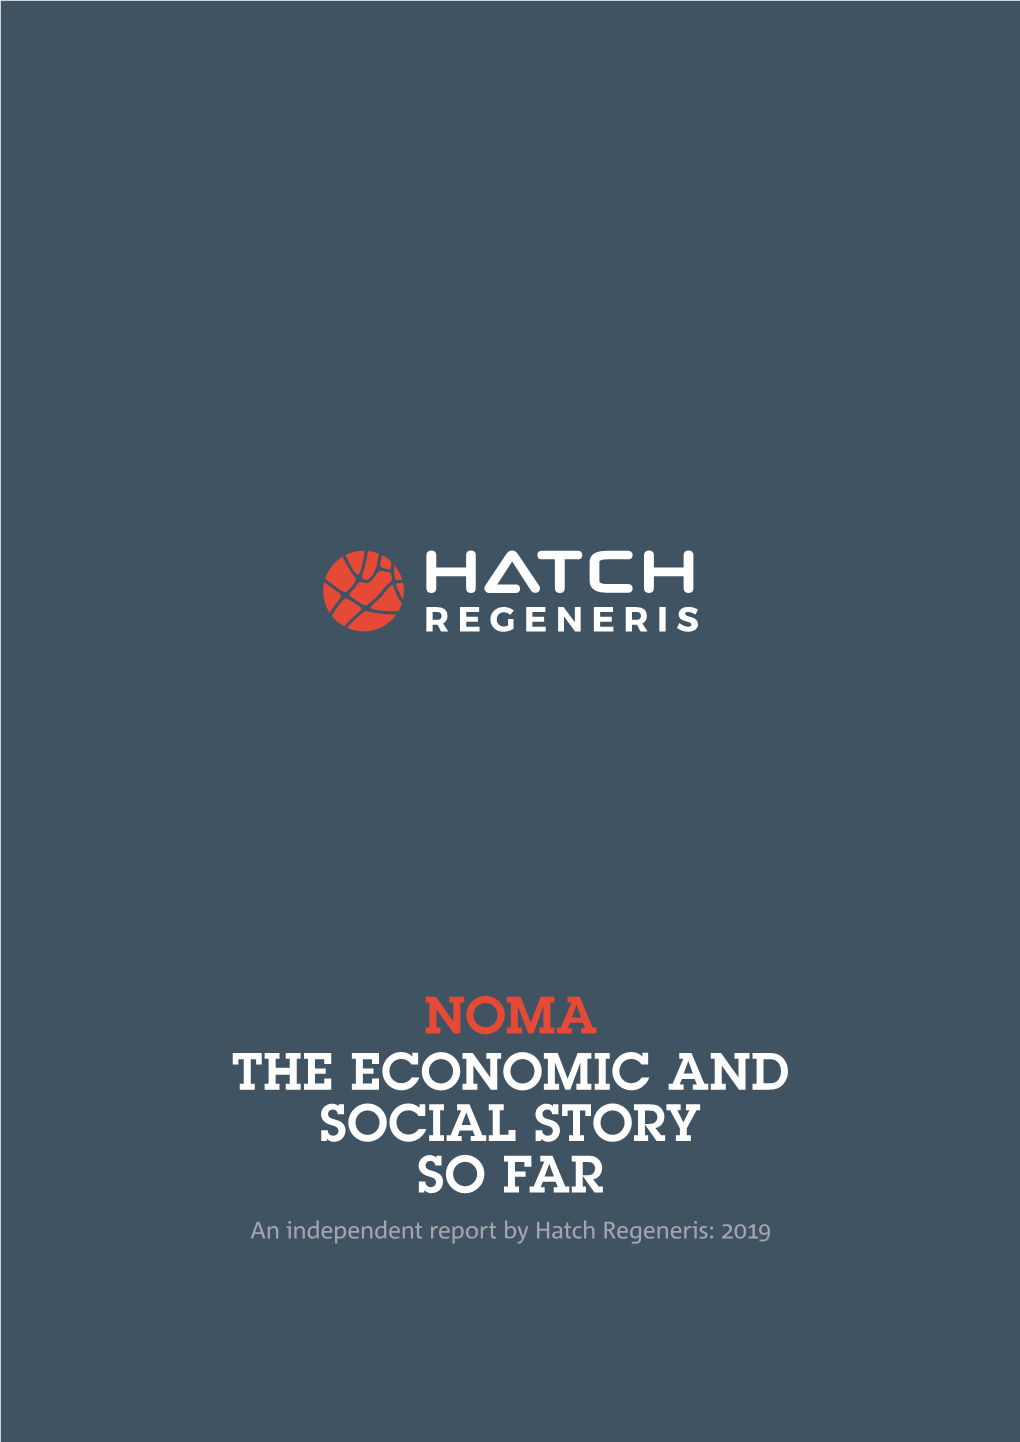 THE ECONOMIC and SOCIAL STORY SO FAR an Independent Report by Hatch Regeneris: 2019 NOMA the ECONOMIC and SOCIAL STORY SO FAR